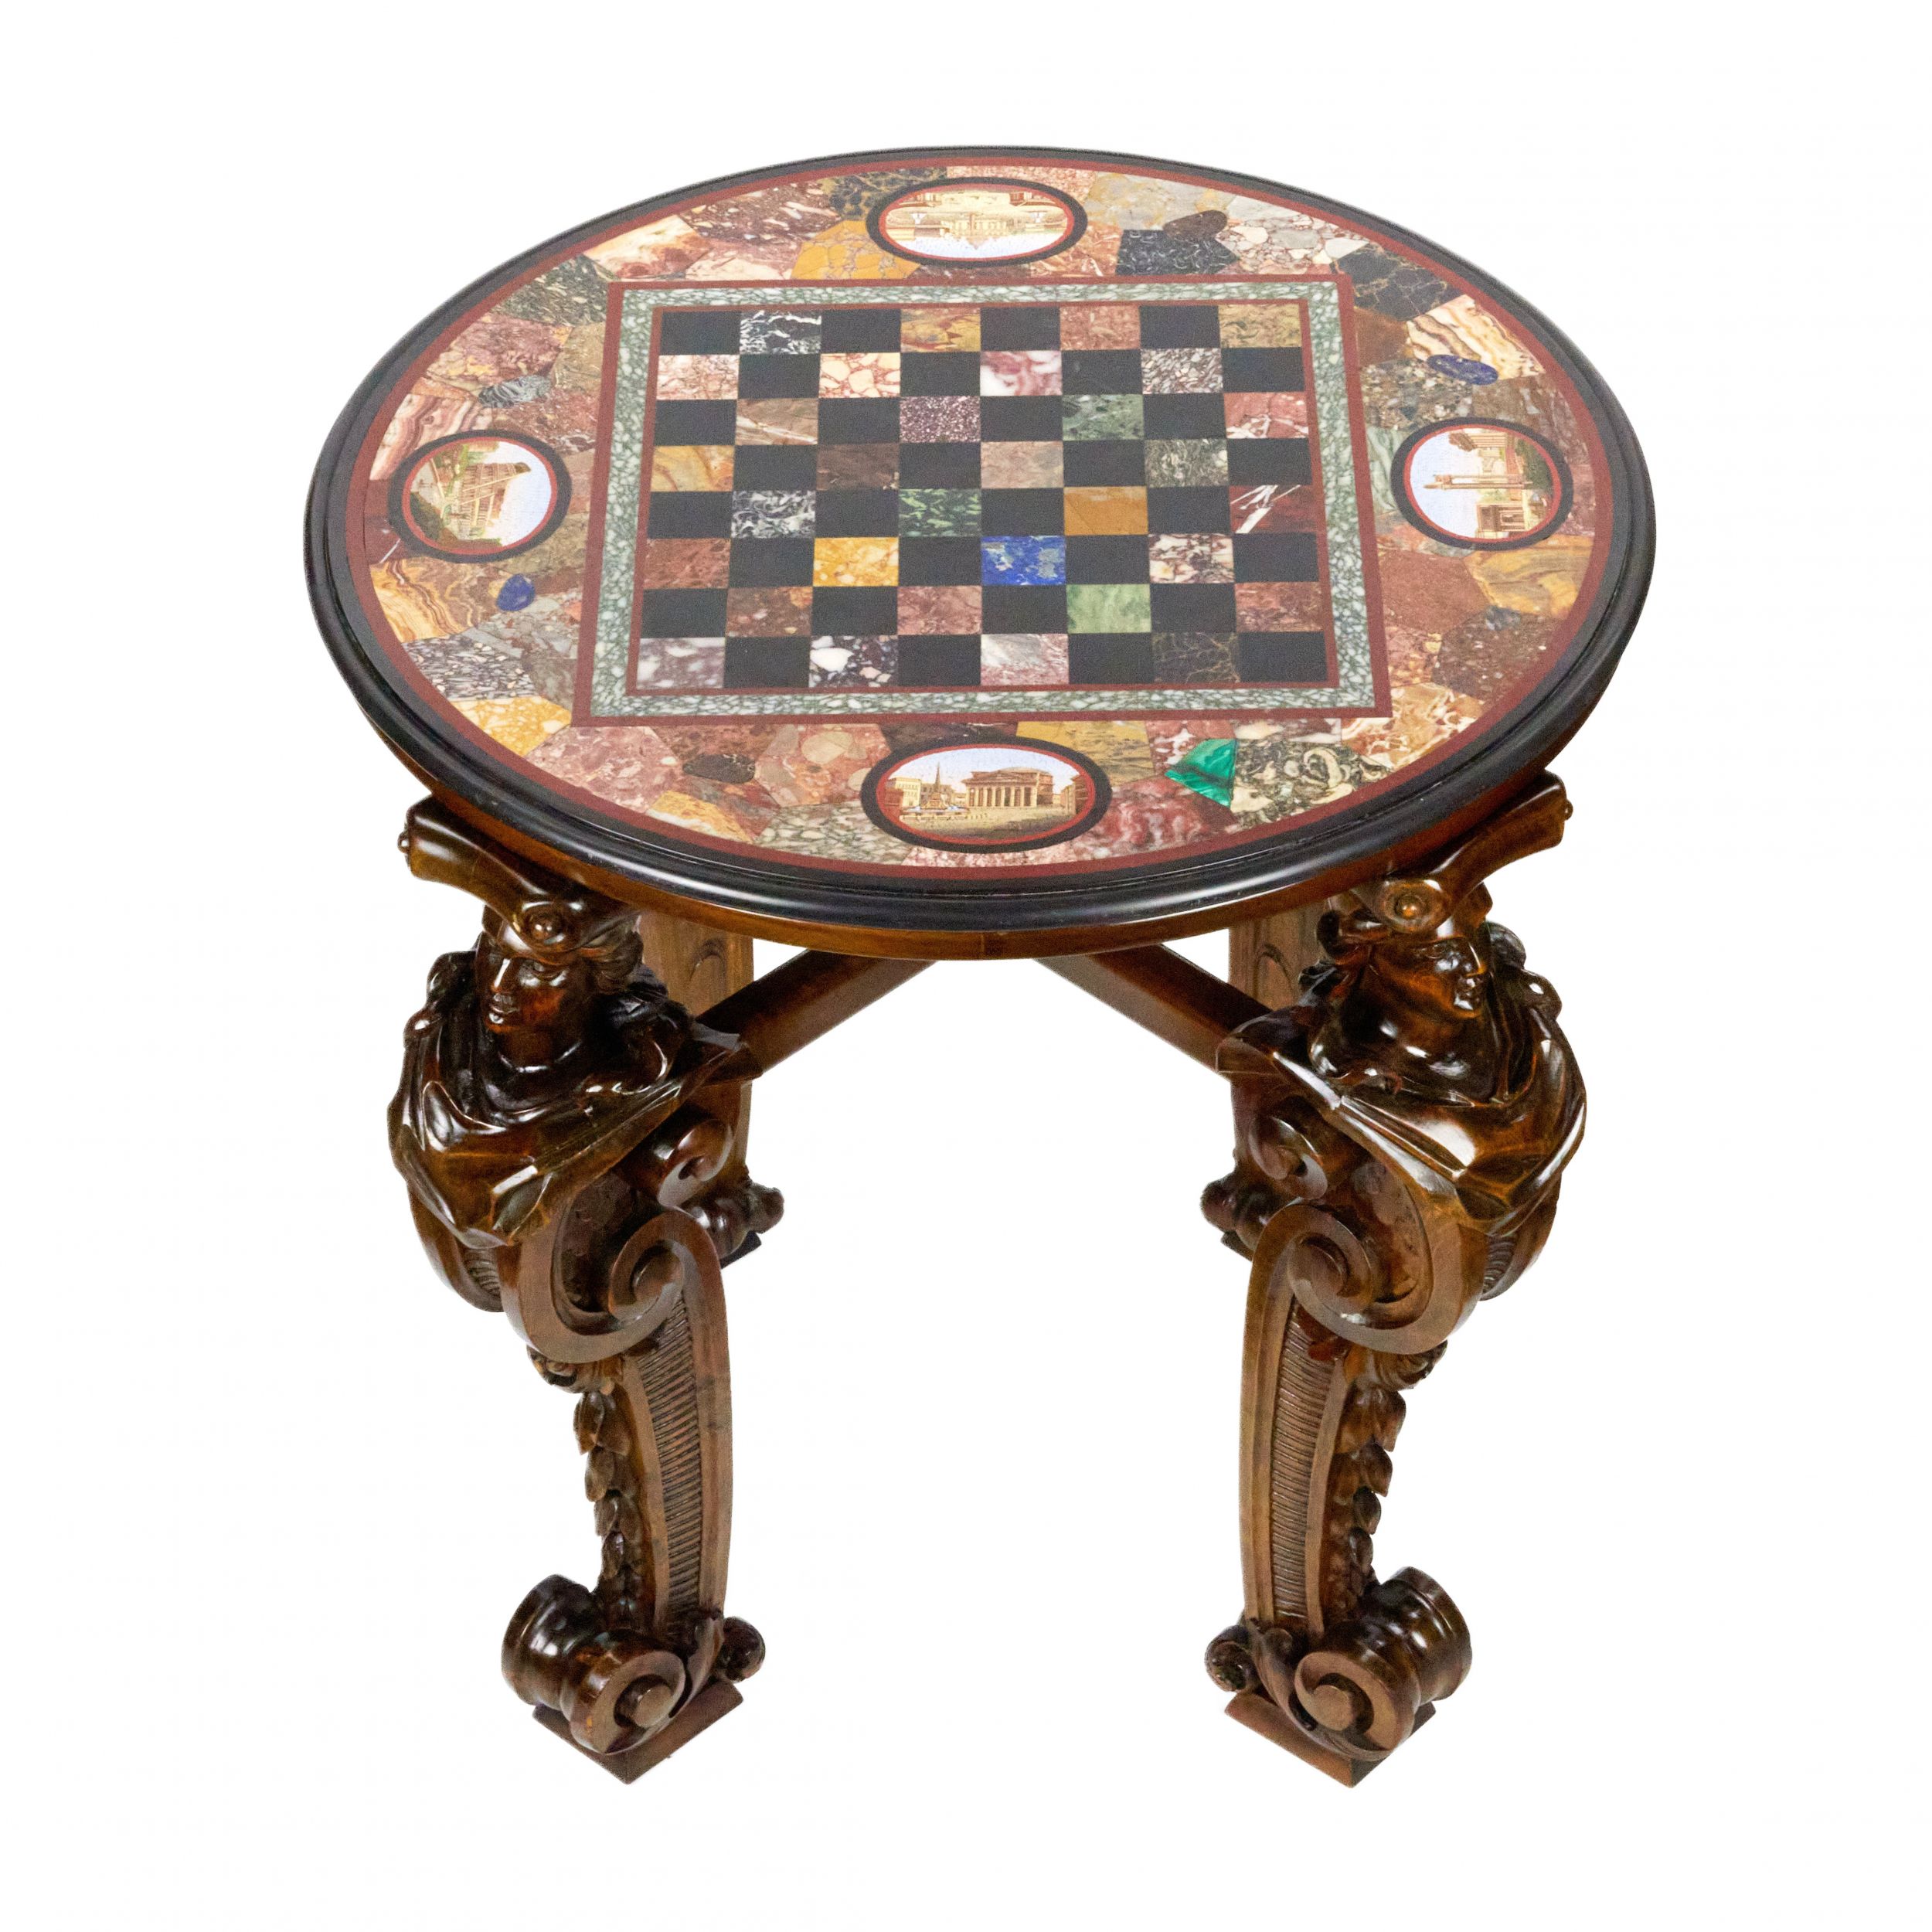 An impressive chess table with precious Roman mosaics on carved legs. - Image 5 of 10